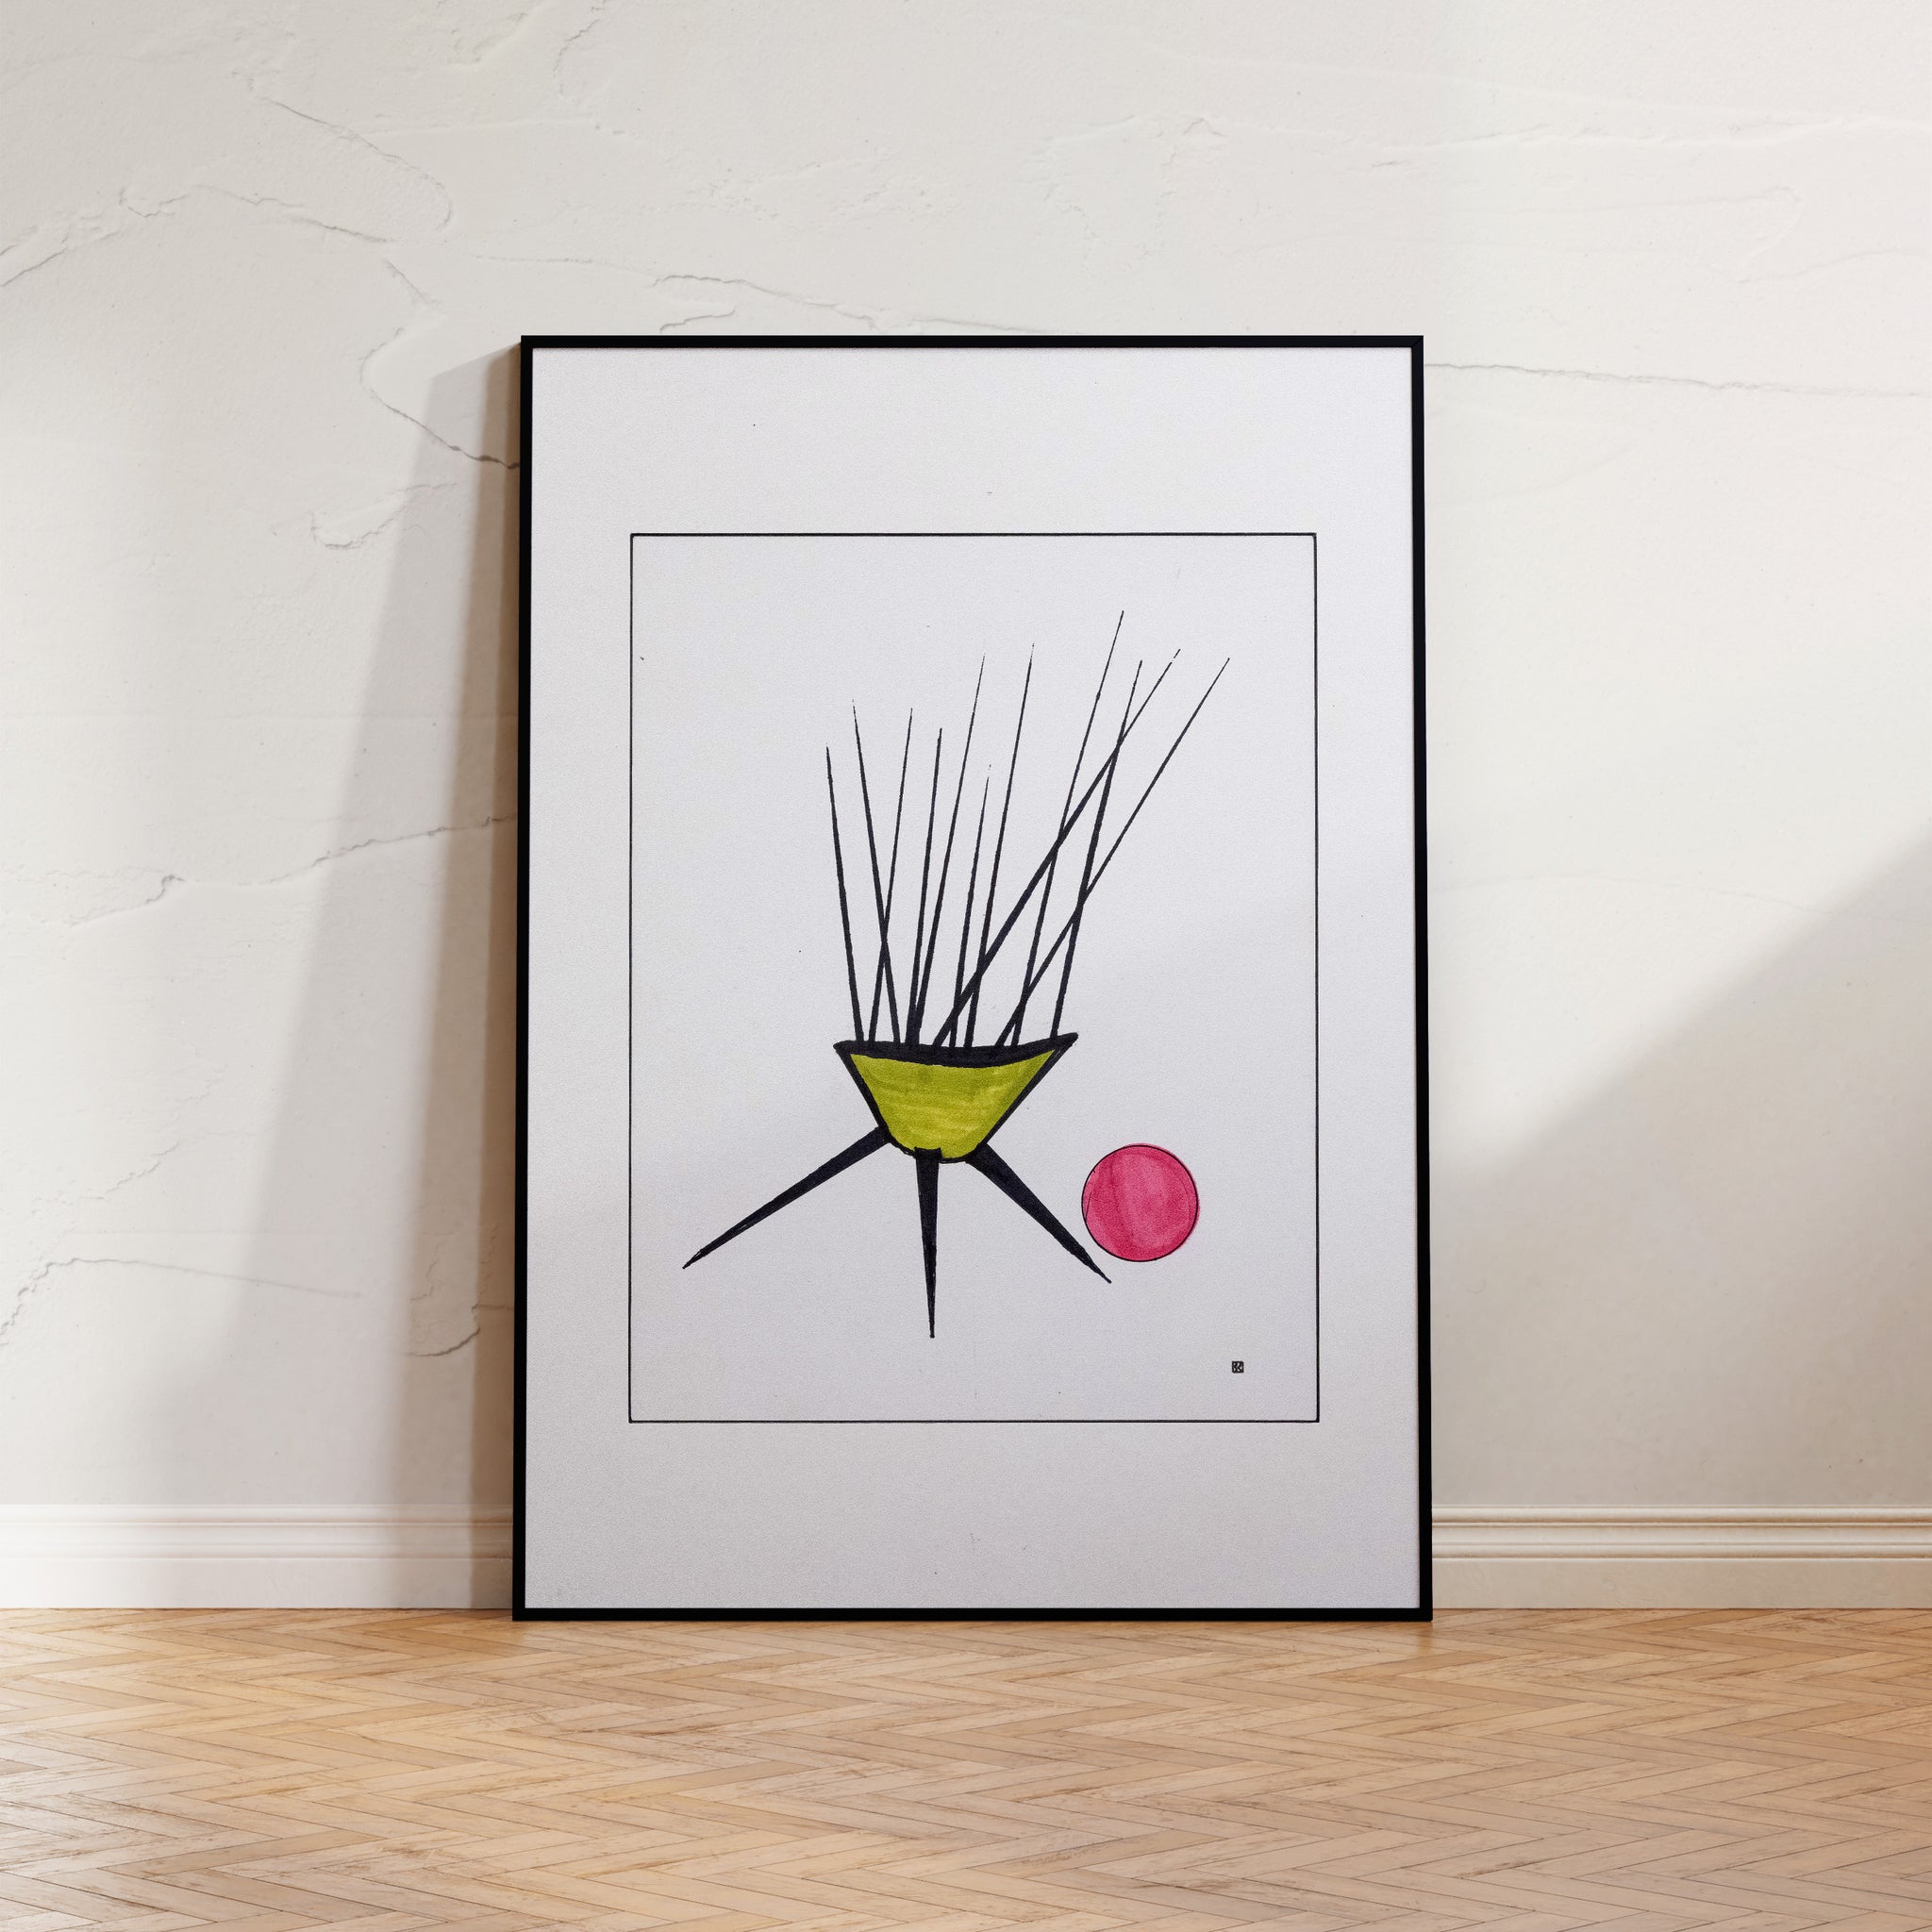 Print 'Minimalist Bloom' by Brian Findleton, featuring a pink flower and a black pole on a white background, symbolizing minimalist abstraction.  -